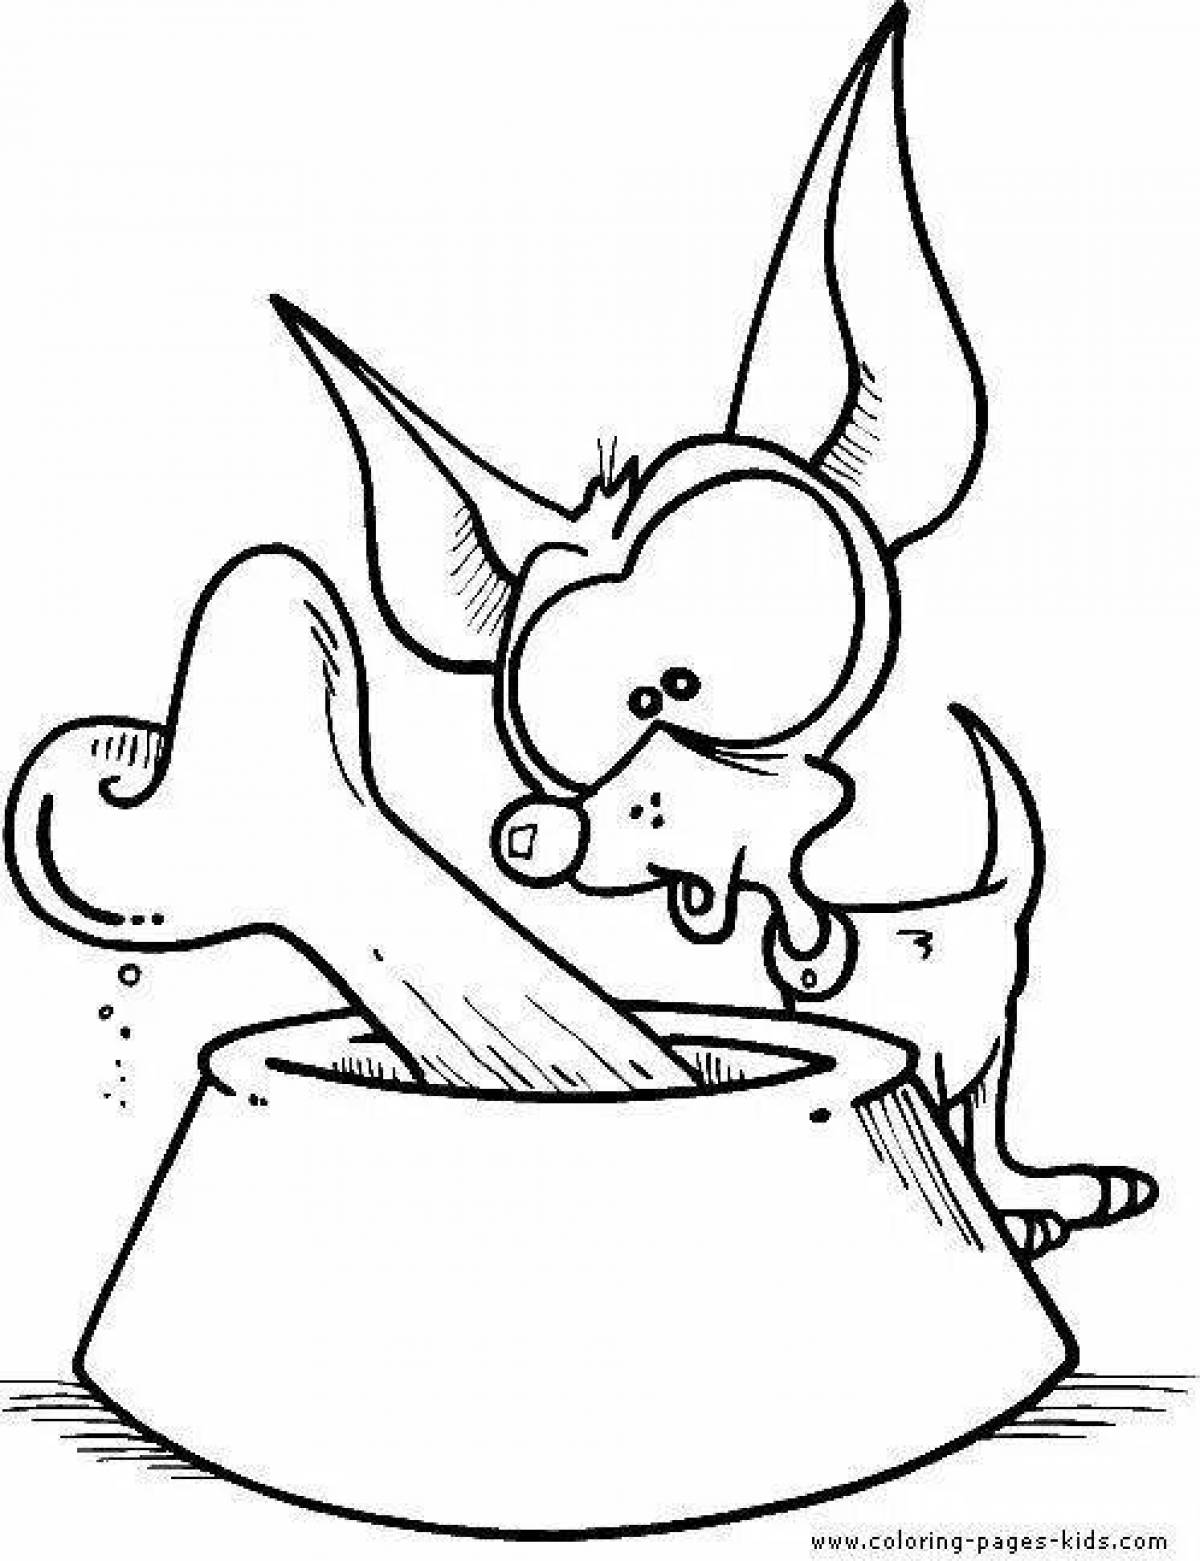 Violent coloring pages funny animals